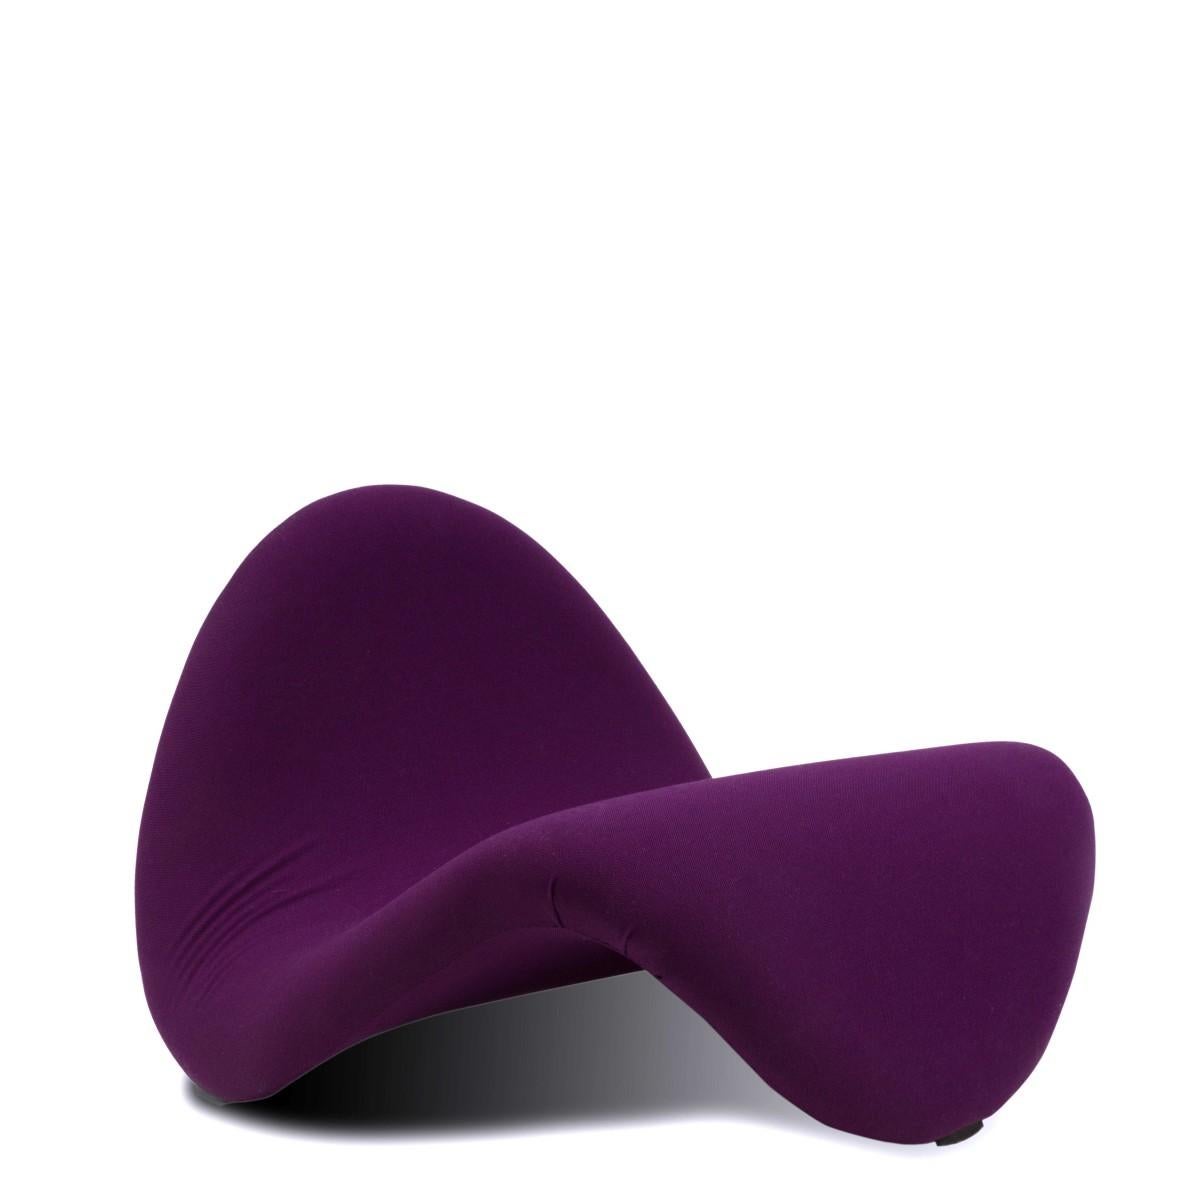 Pierre Paulin tongue lounge chair designed in 1968 and made by Artifort. This modern low lounge chair is upholstered in a deep purple fabric and will be a sculptural accent to any room. 
Seat height: 13.5